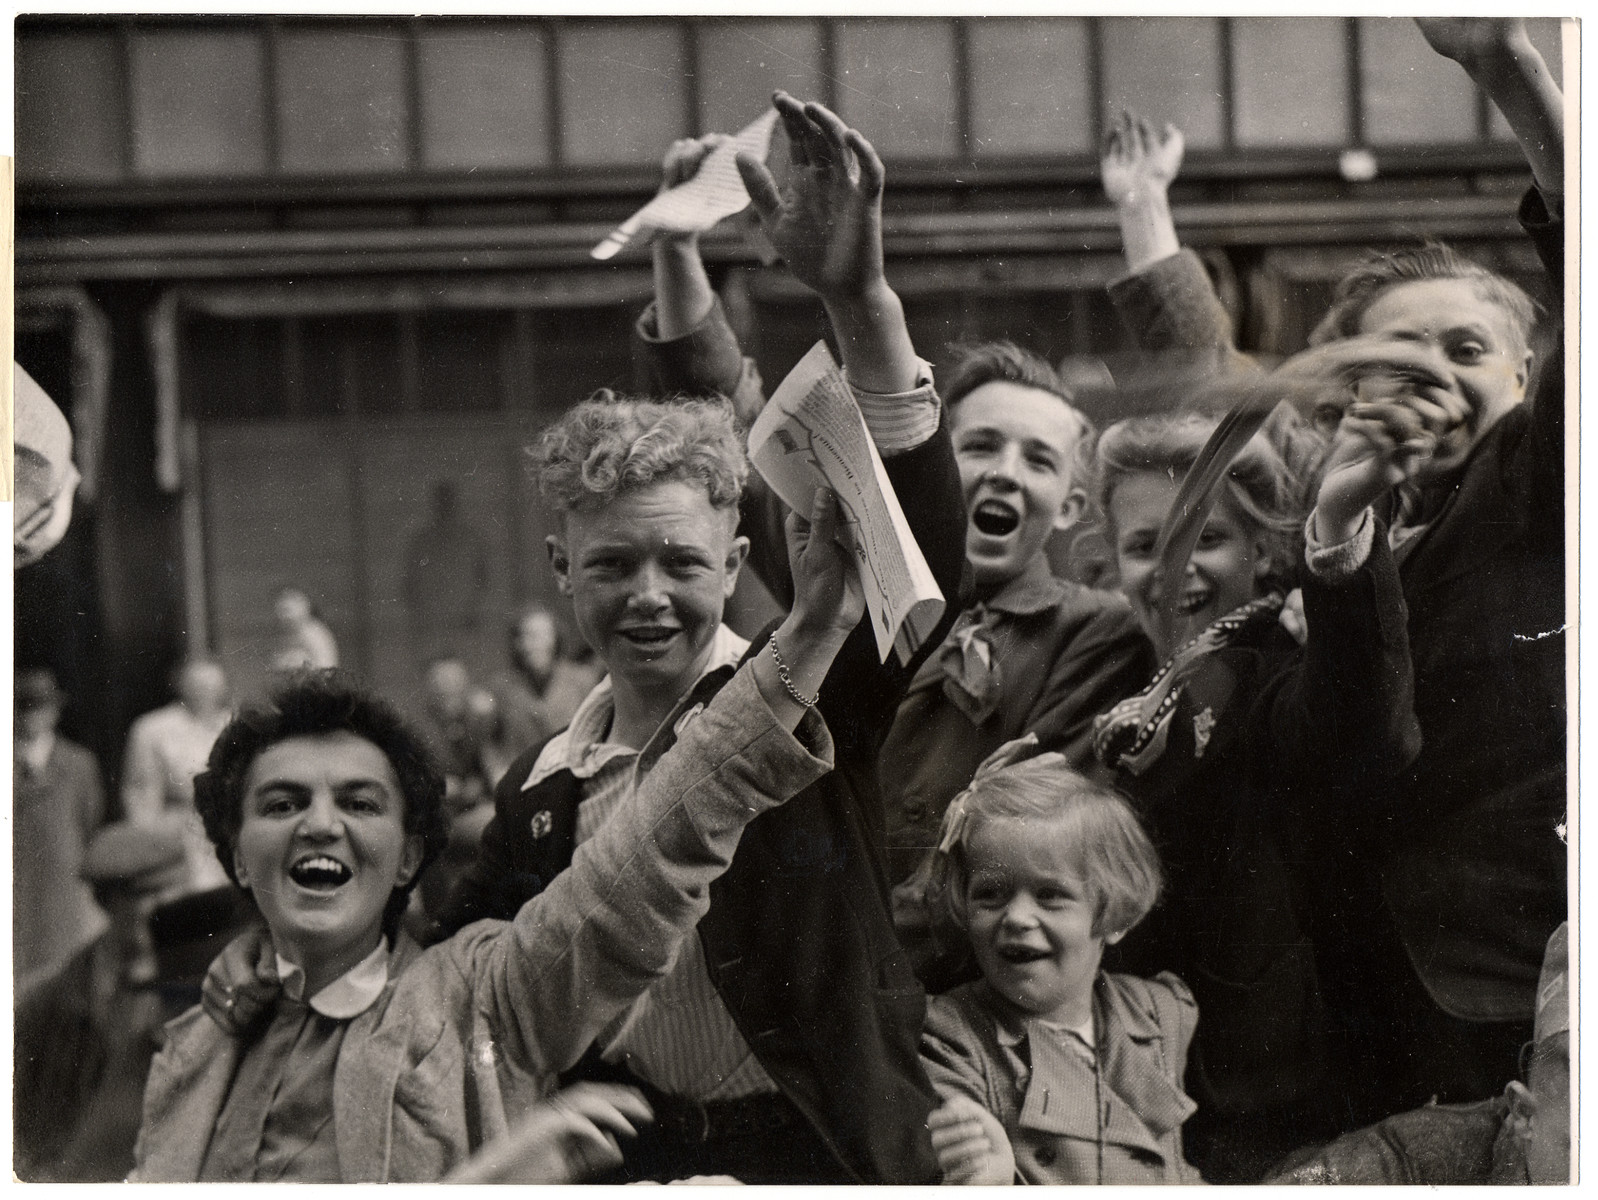 Dutch civilians celebrate their liberation by Allied troops.

Original Caption: "Victory crowds celebrating in the streets of Utrecht, Holland, were fired on by Nazi fanatics hiding in a building overlooking the parade. After a sharp skirmish, the Germans were captured by Dutch patriots and the celebration was resumed. Here, the cheering Dutch continue their celebrations of the Allied victory in Europe and their own liberation after five years under German occupation"